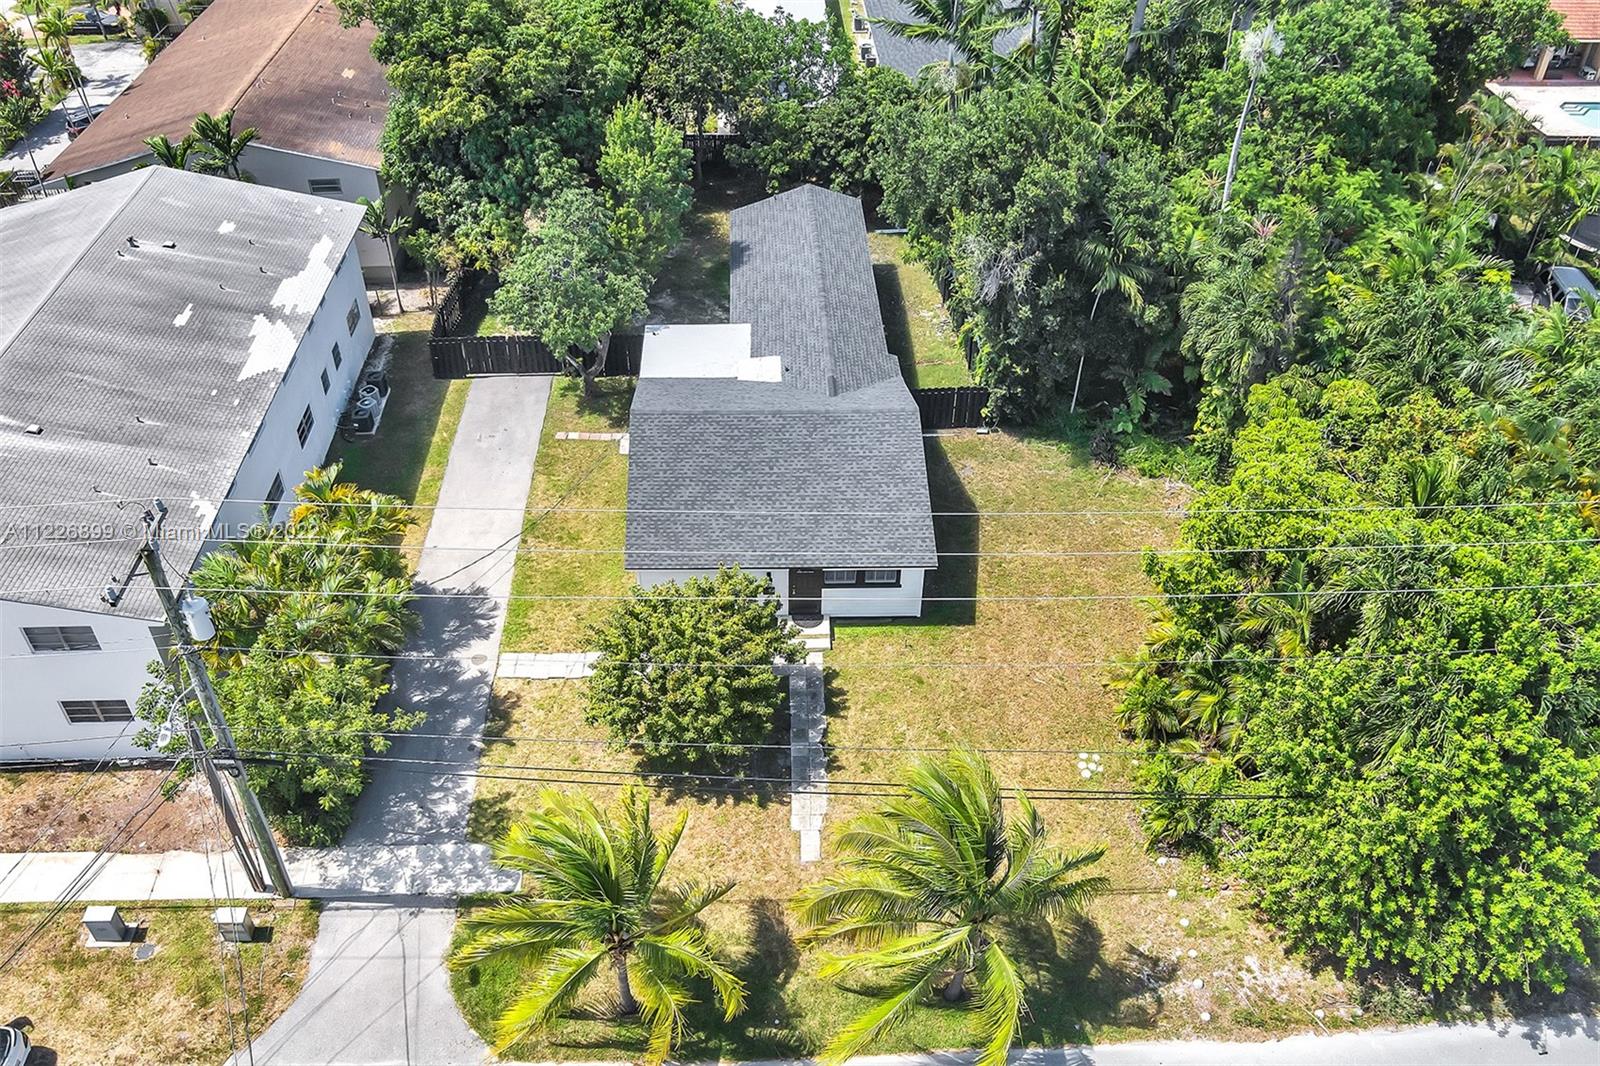 GREAT INVESTMENT OPPORTUNITY!!!!

Great location, Close to gulfstream, near YMCA ,parks, transportation , shops,  Aventura mall.
Property can be used for AIRBNB and future development opportunity based on city plans.

Renovated and updated New roof (1 year) big backyard.